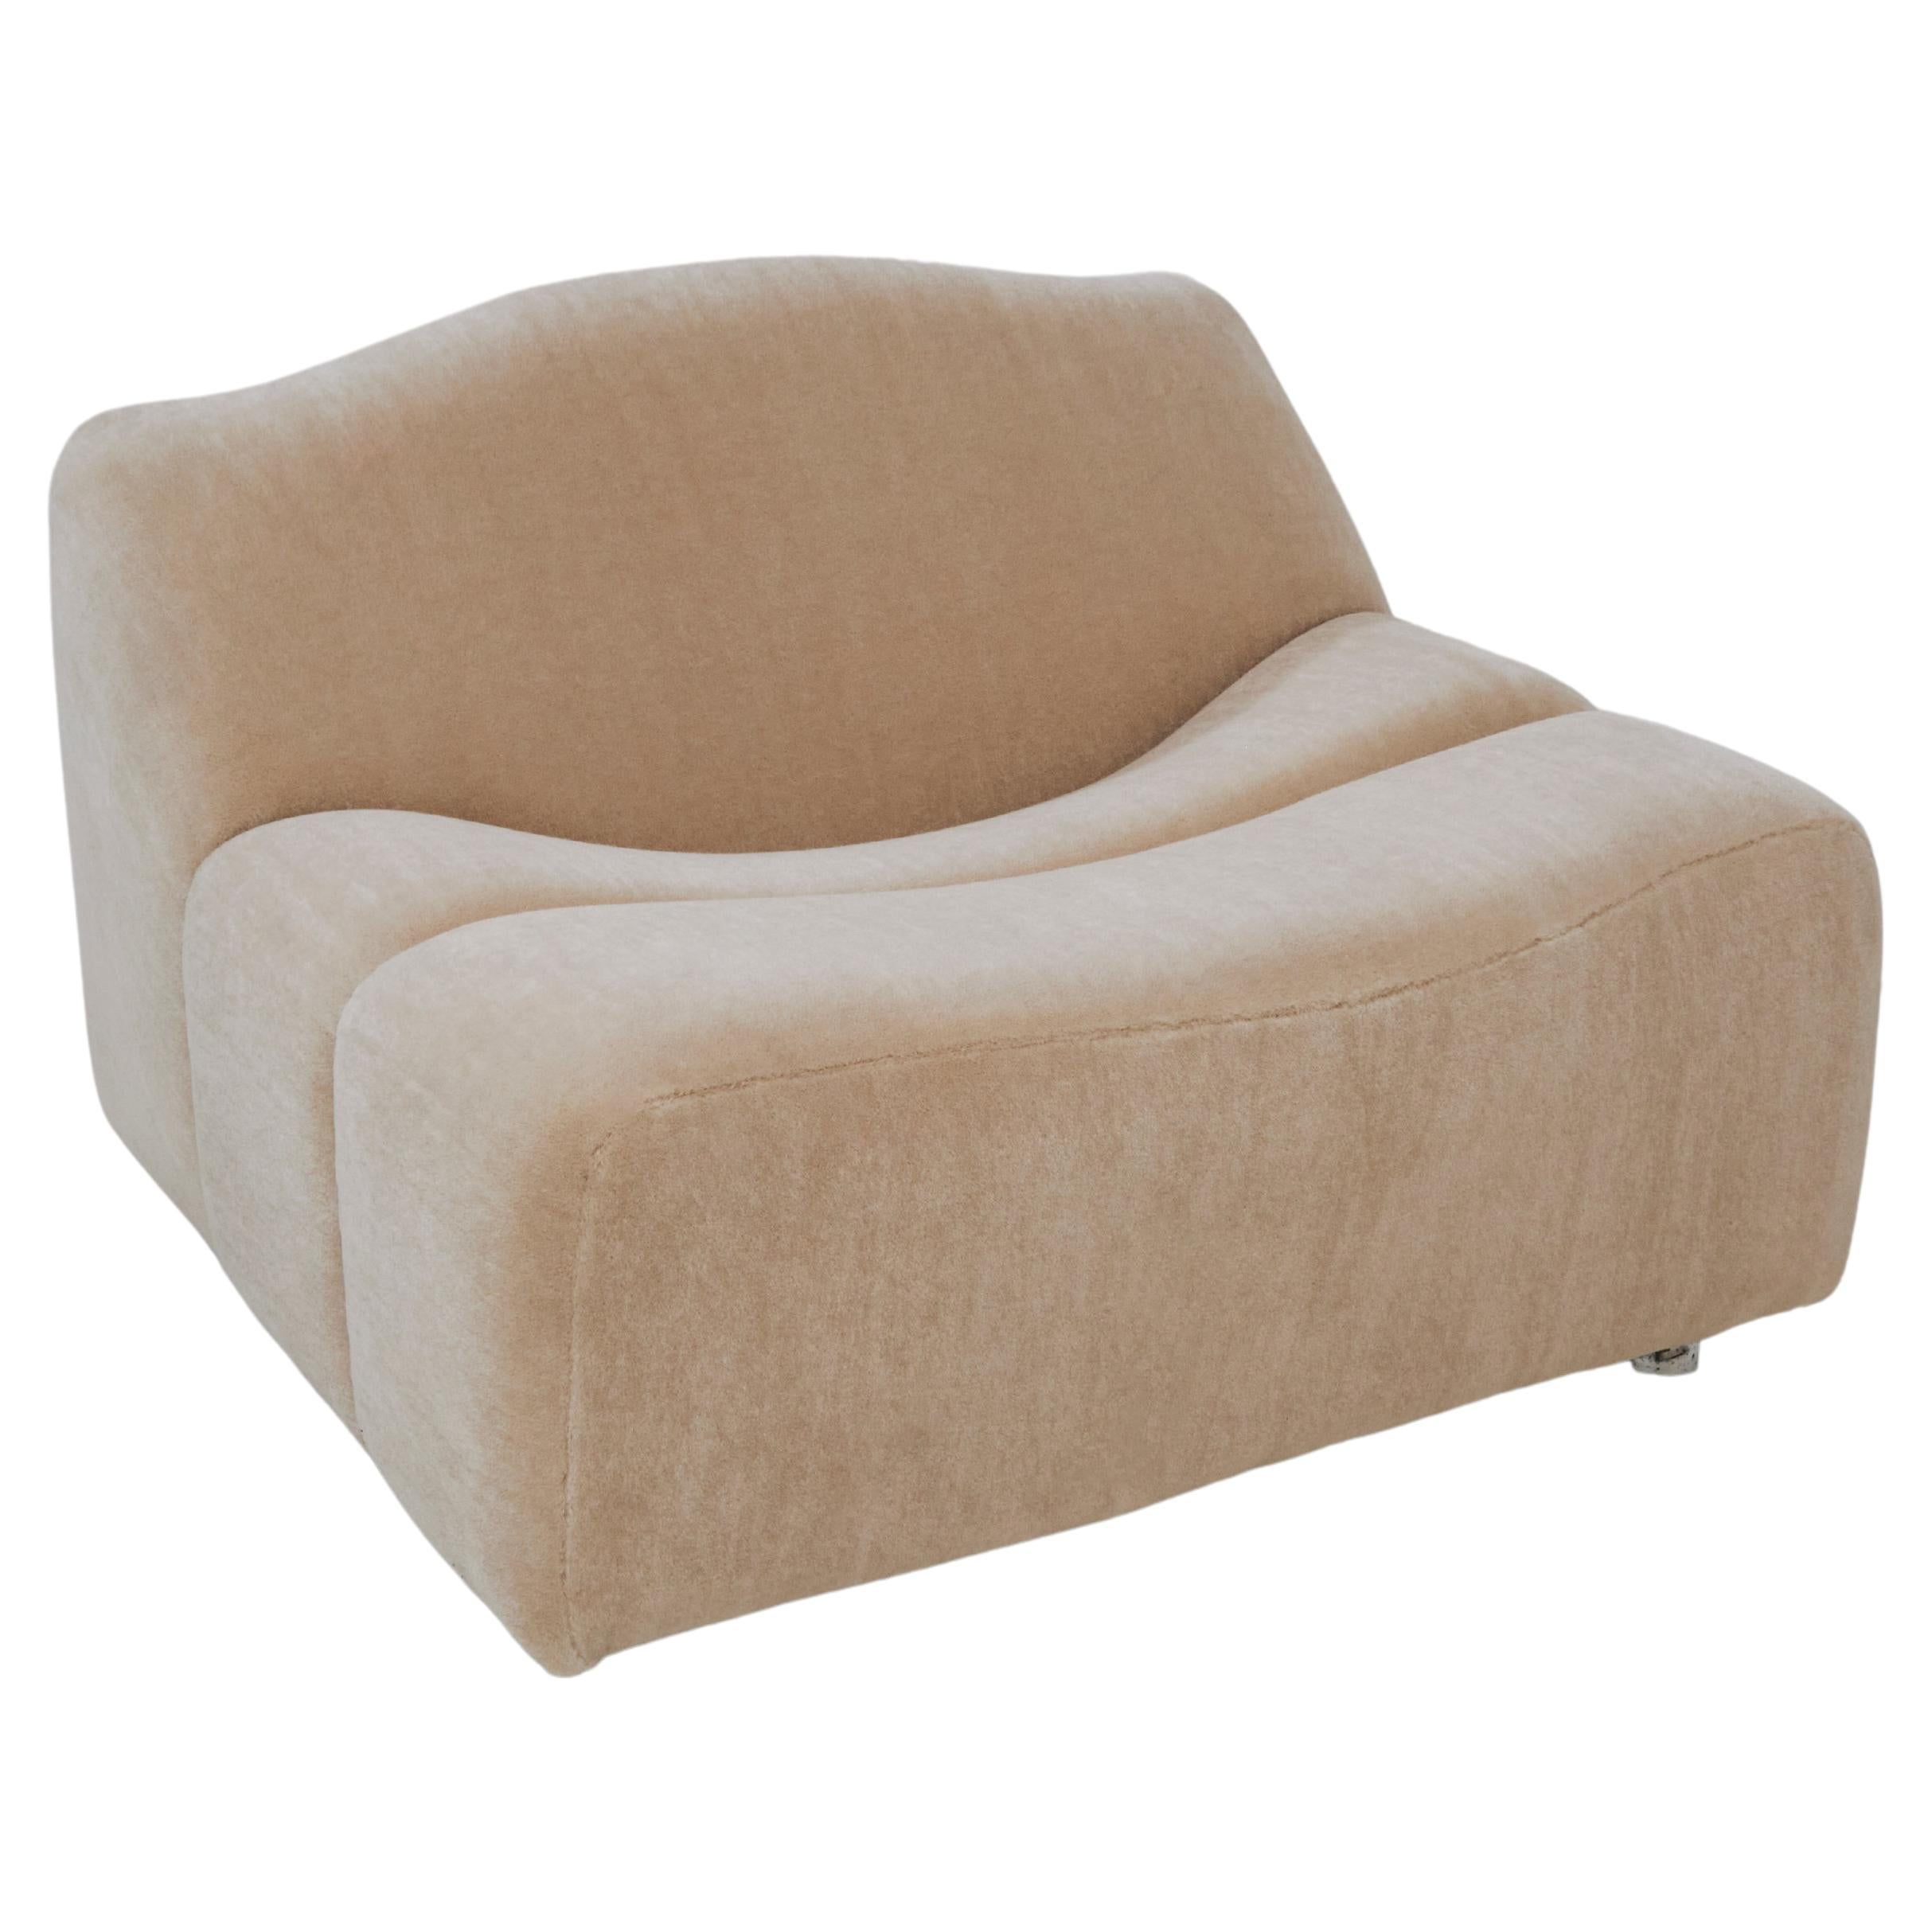 ABCD 1-Seat Chair by Pierre Paulin for Artifort, Mohair